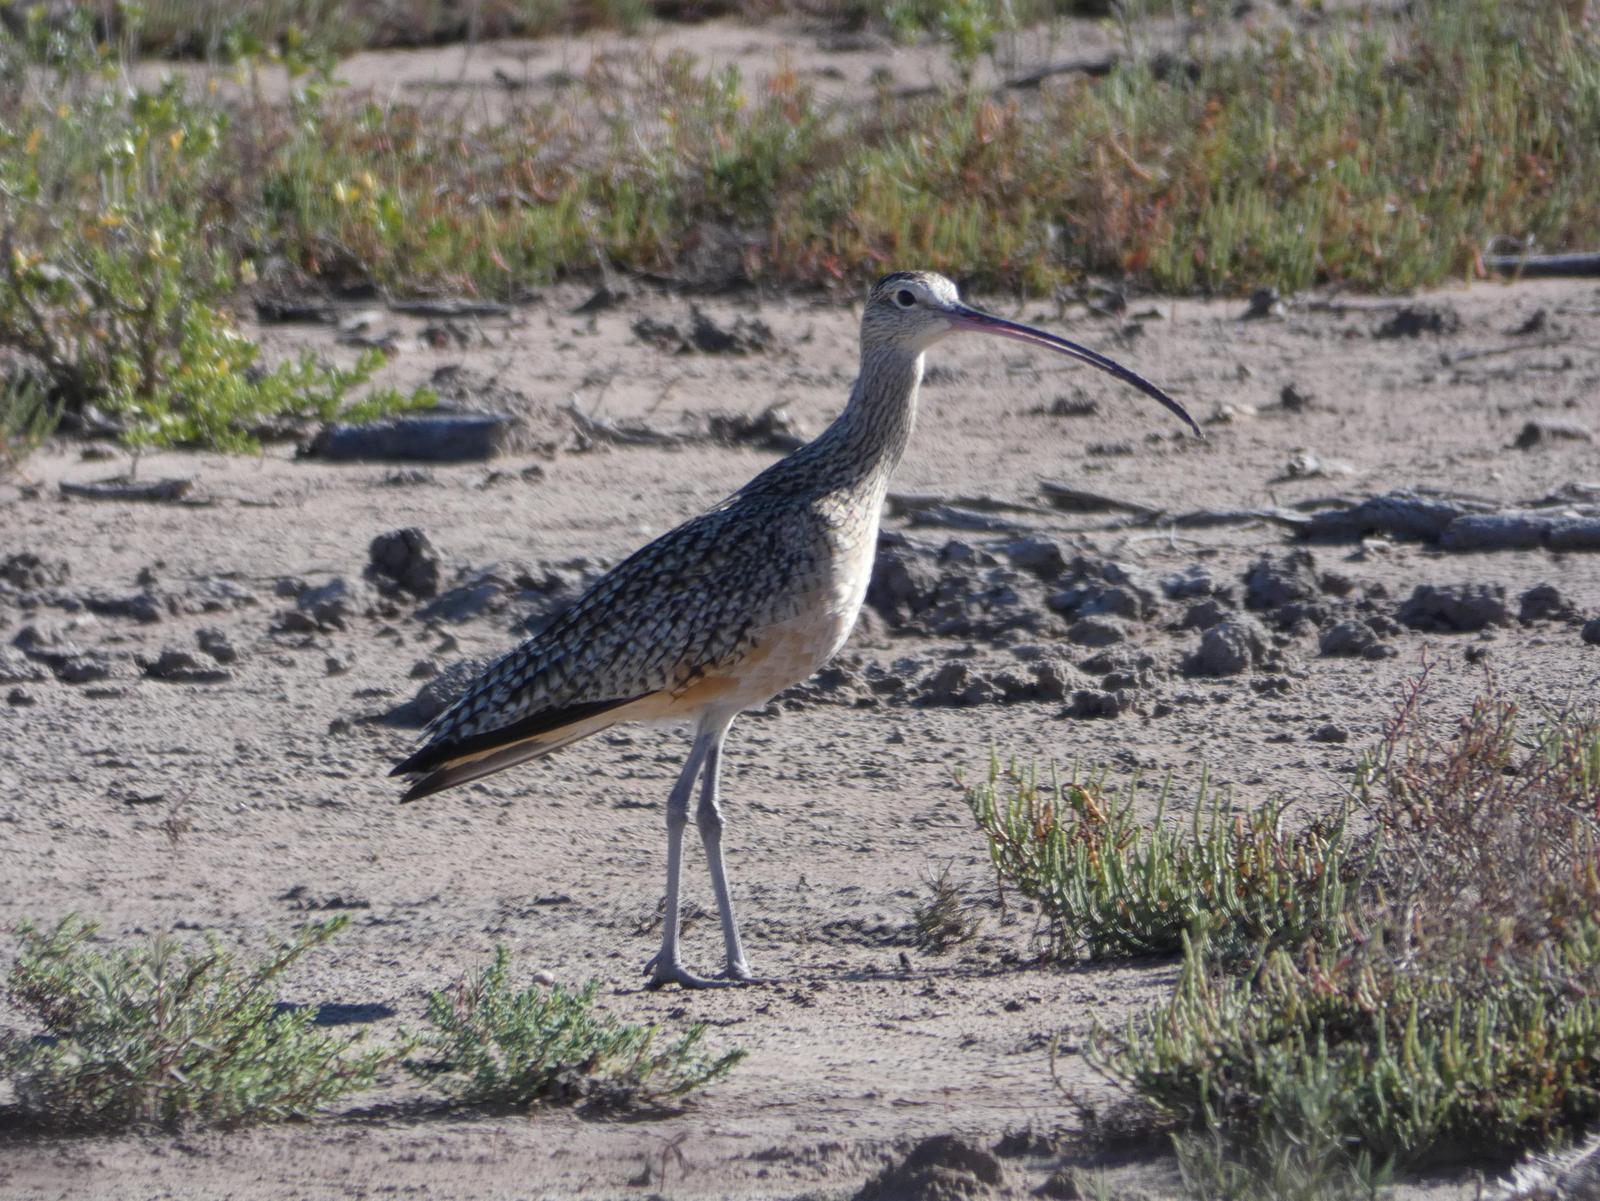 Long-billed Curlew Photo by Phil Ryan